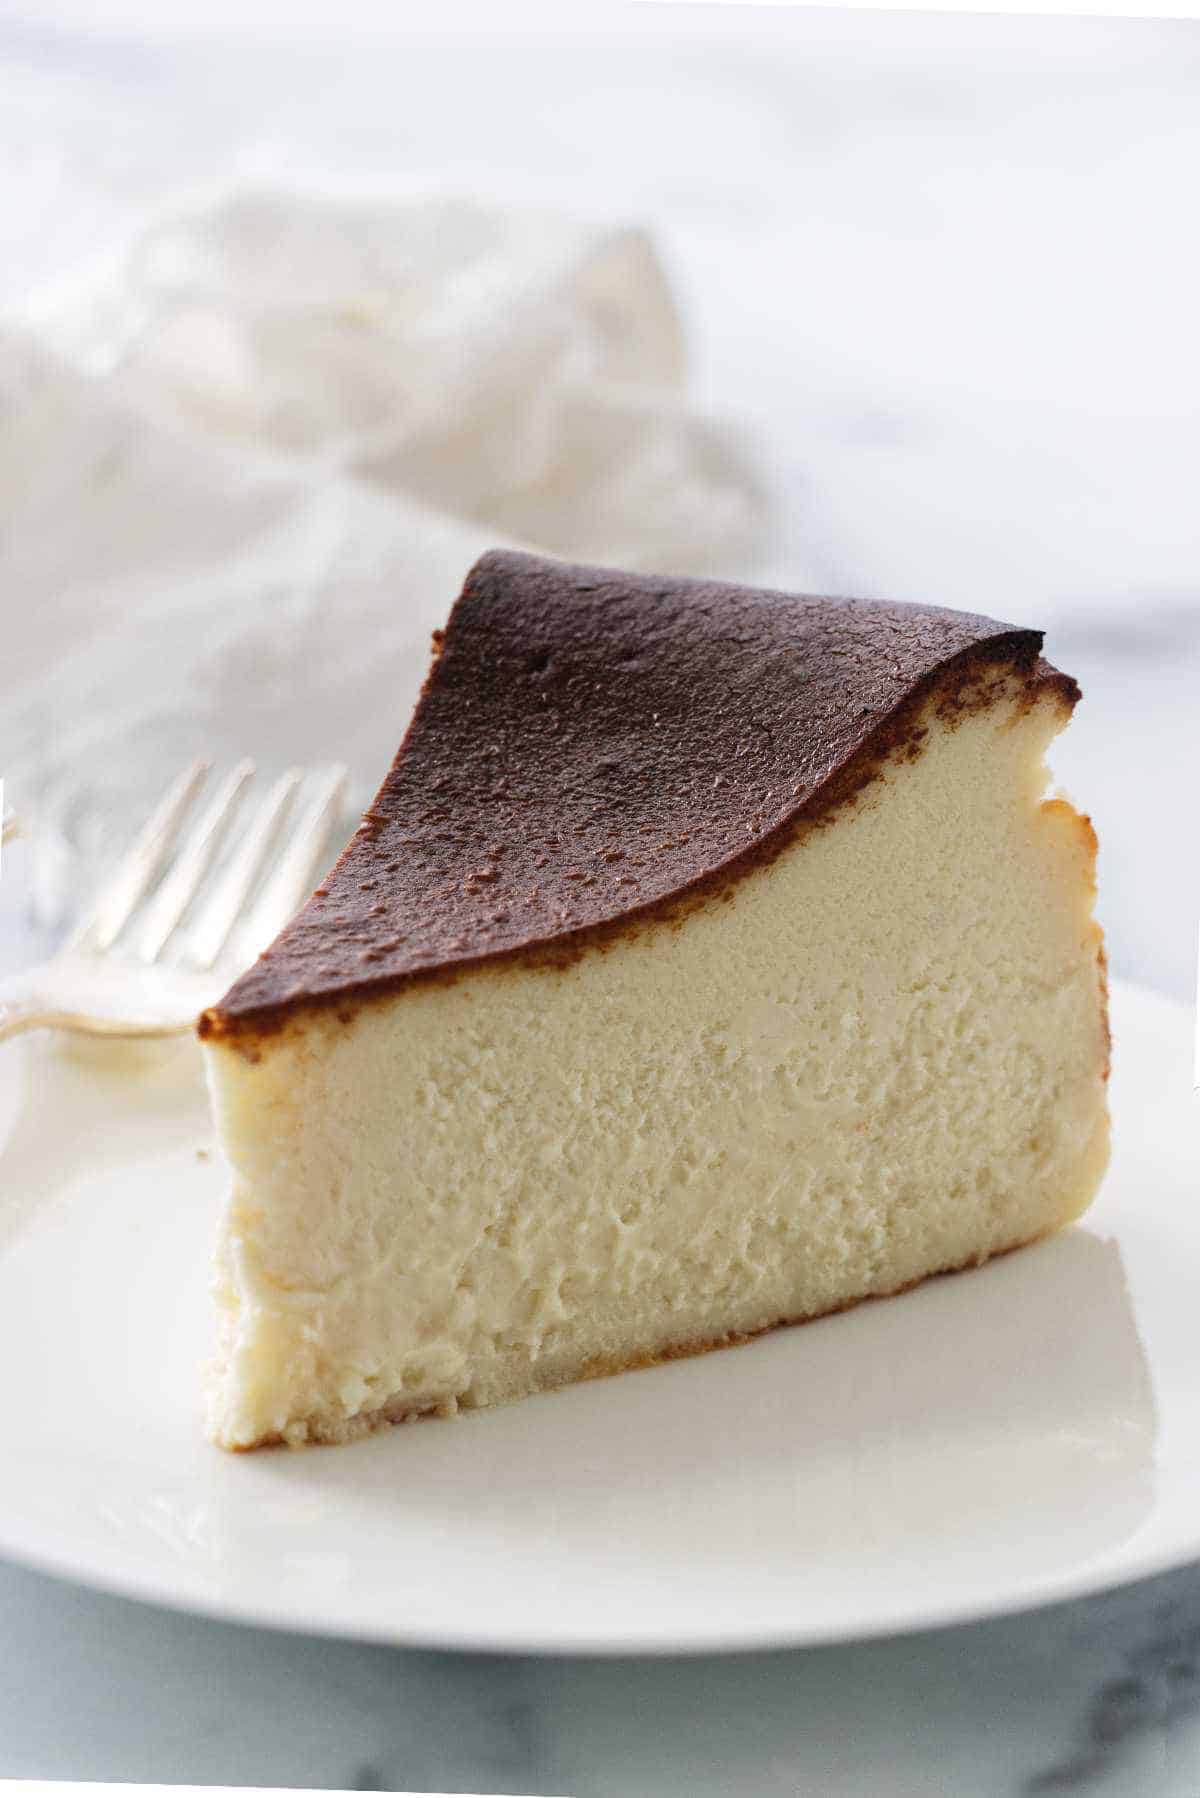 Slice of cheesecake cut from large cake.